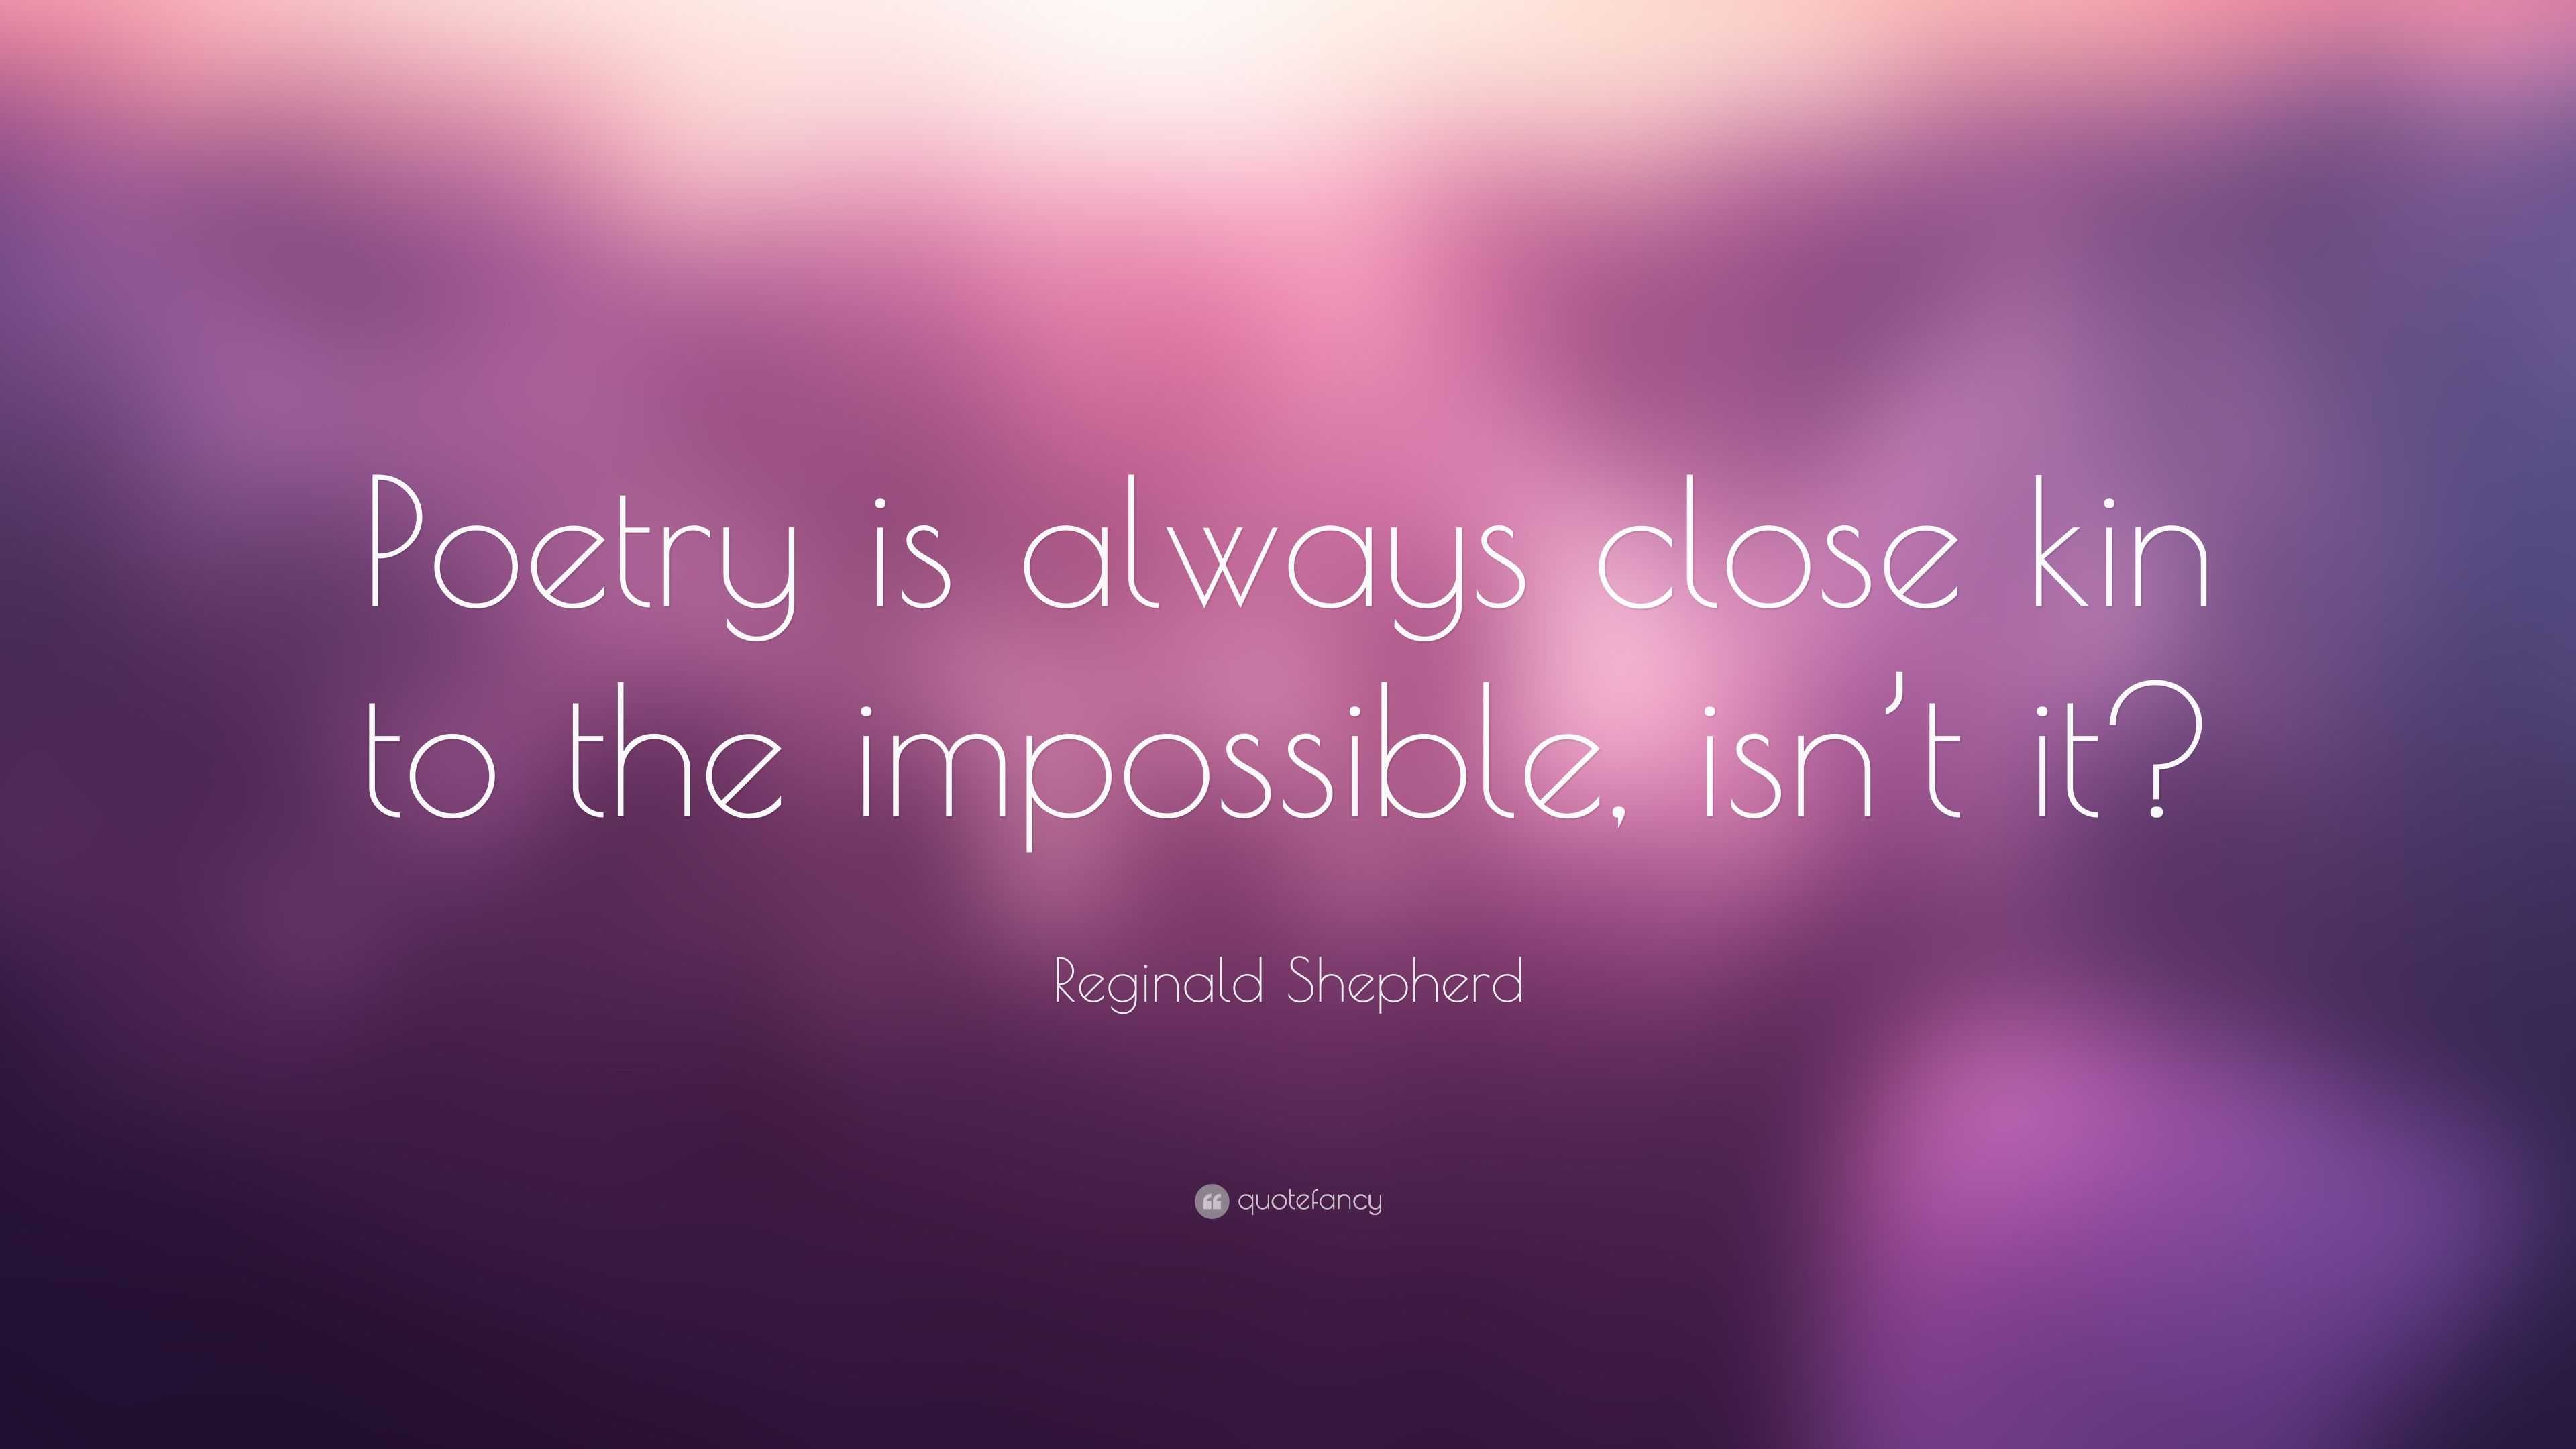 Reginald Shepherd Quote: “Poetry is always close kin to the impossible ...